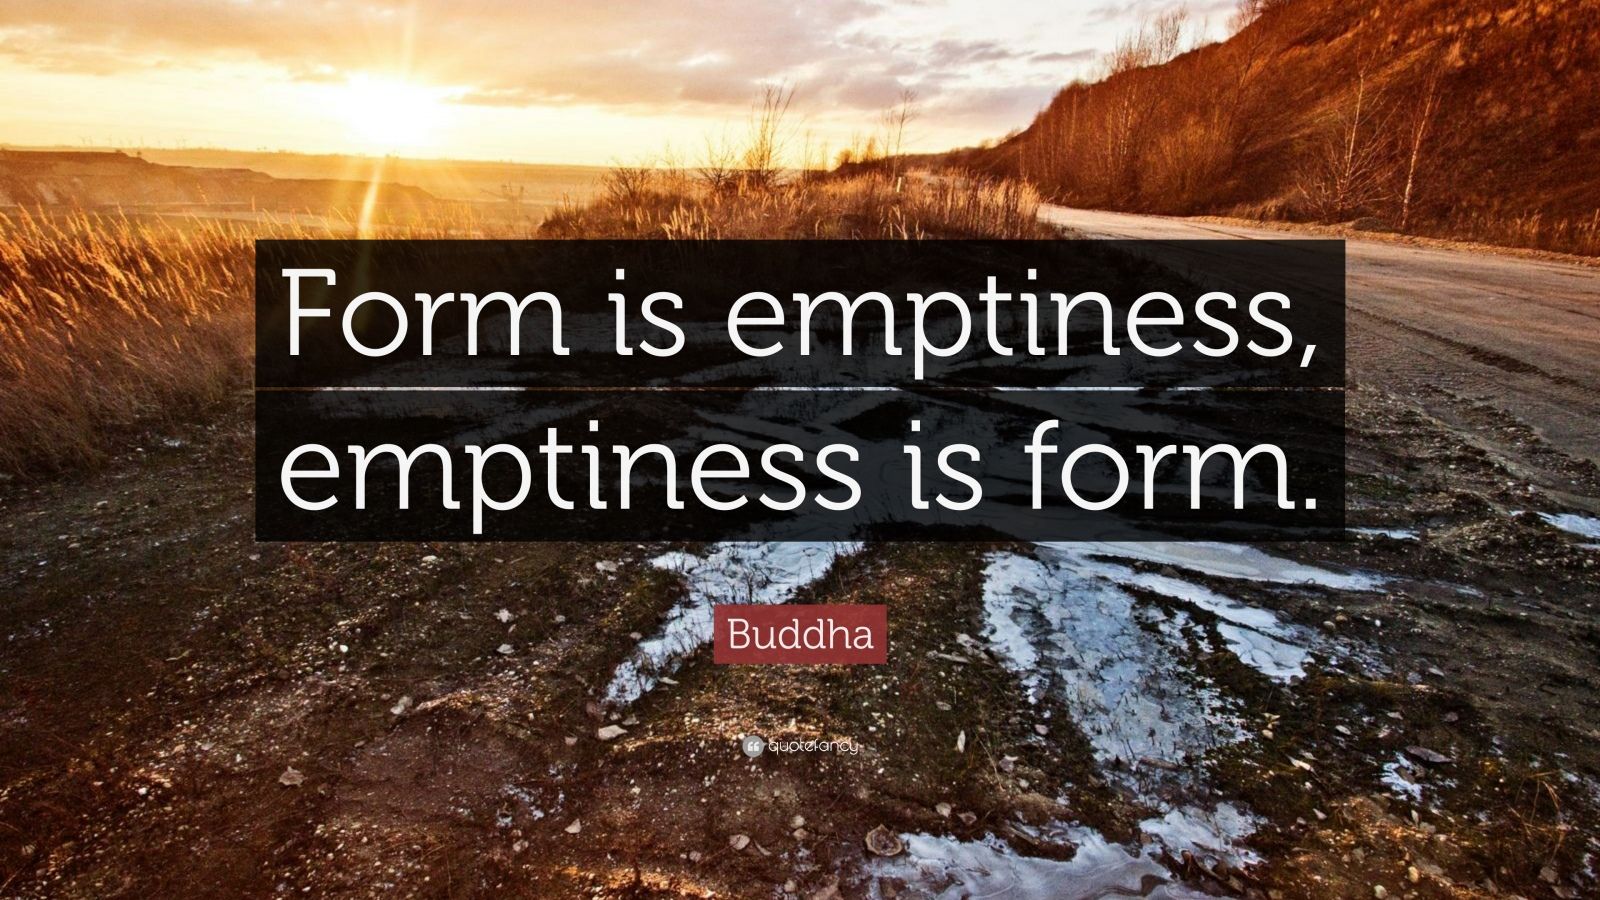 Emptiness is form and form is emptiness essay